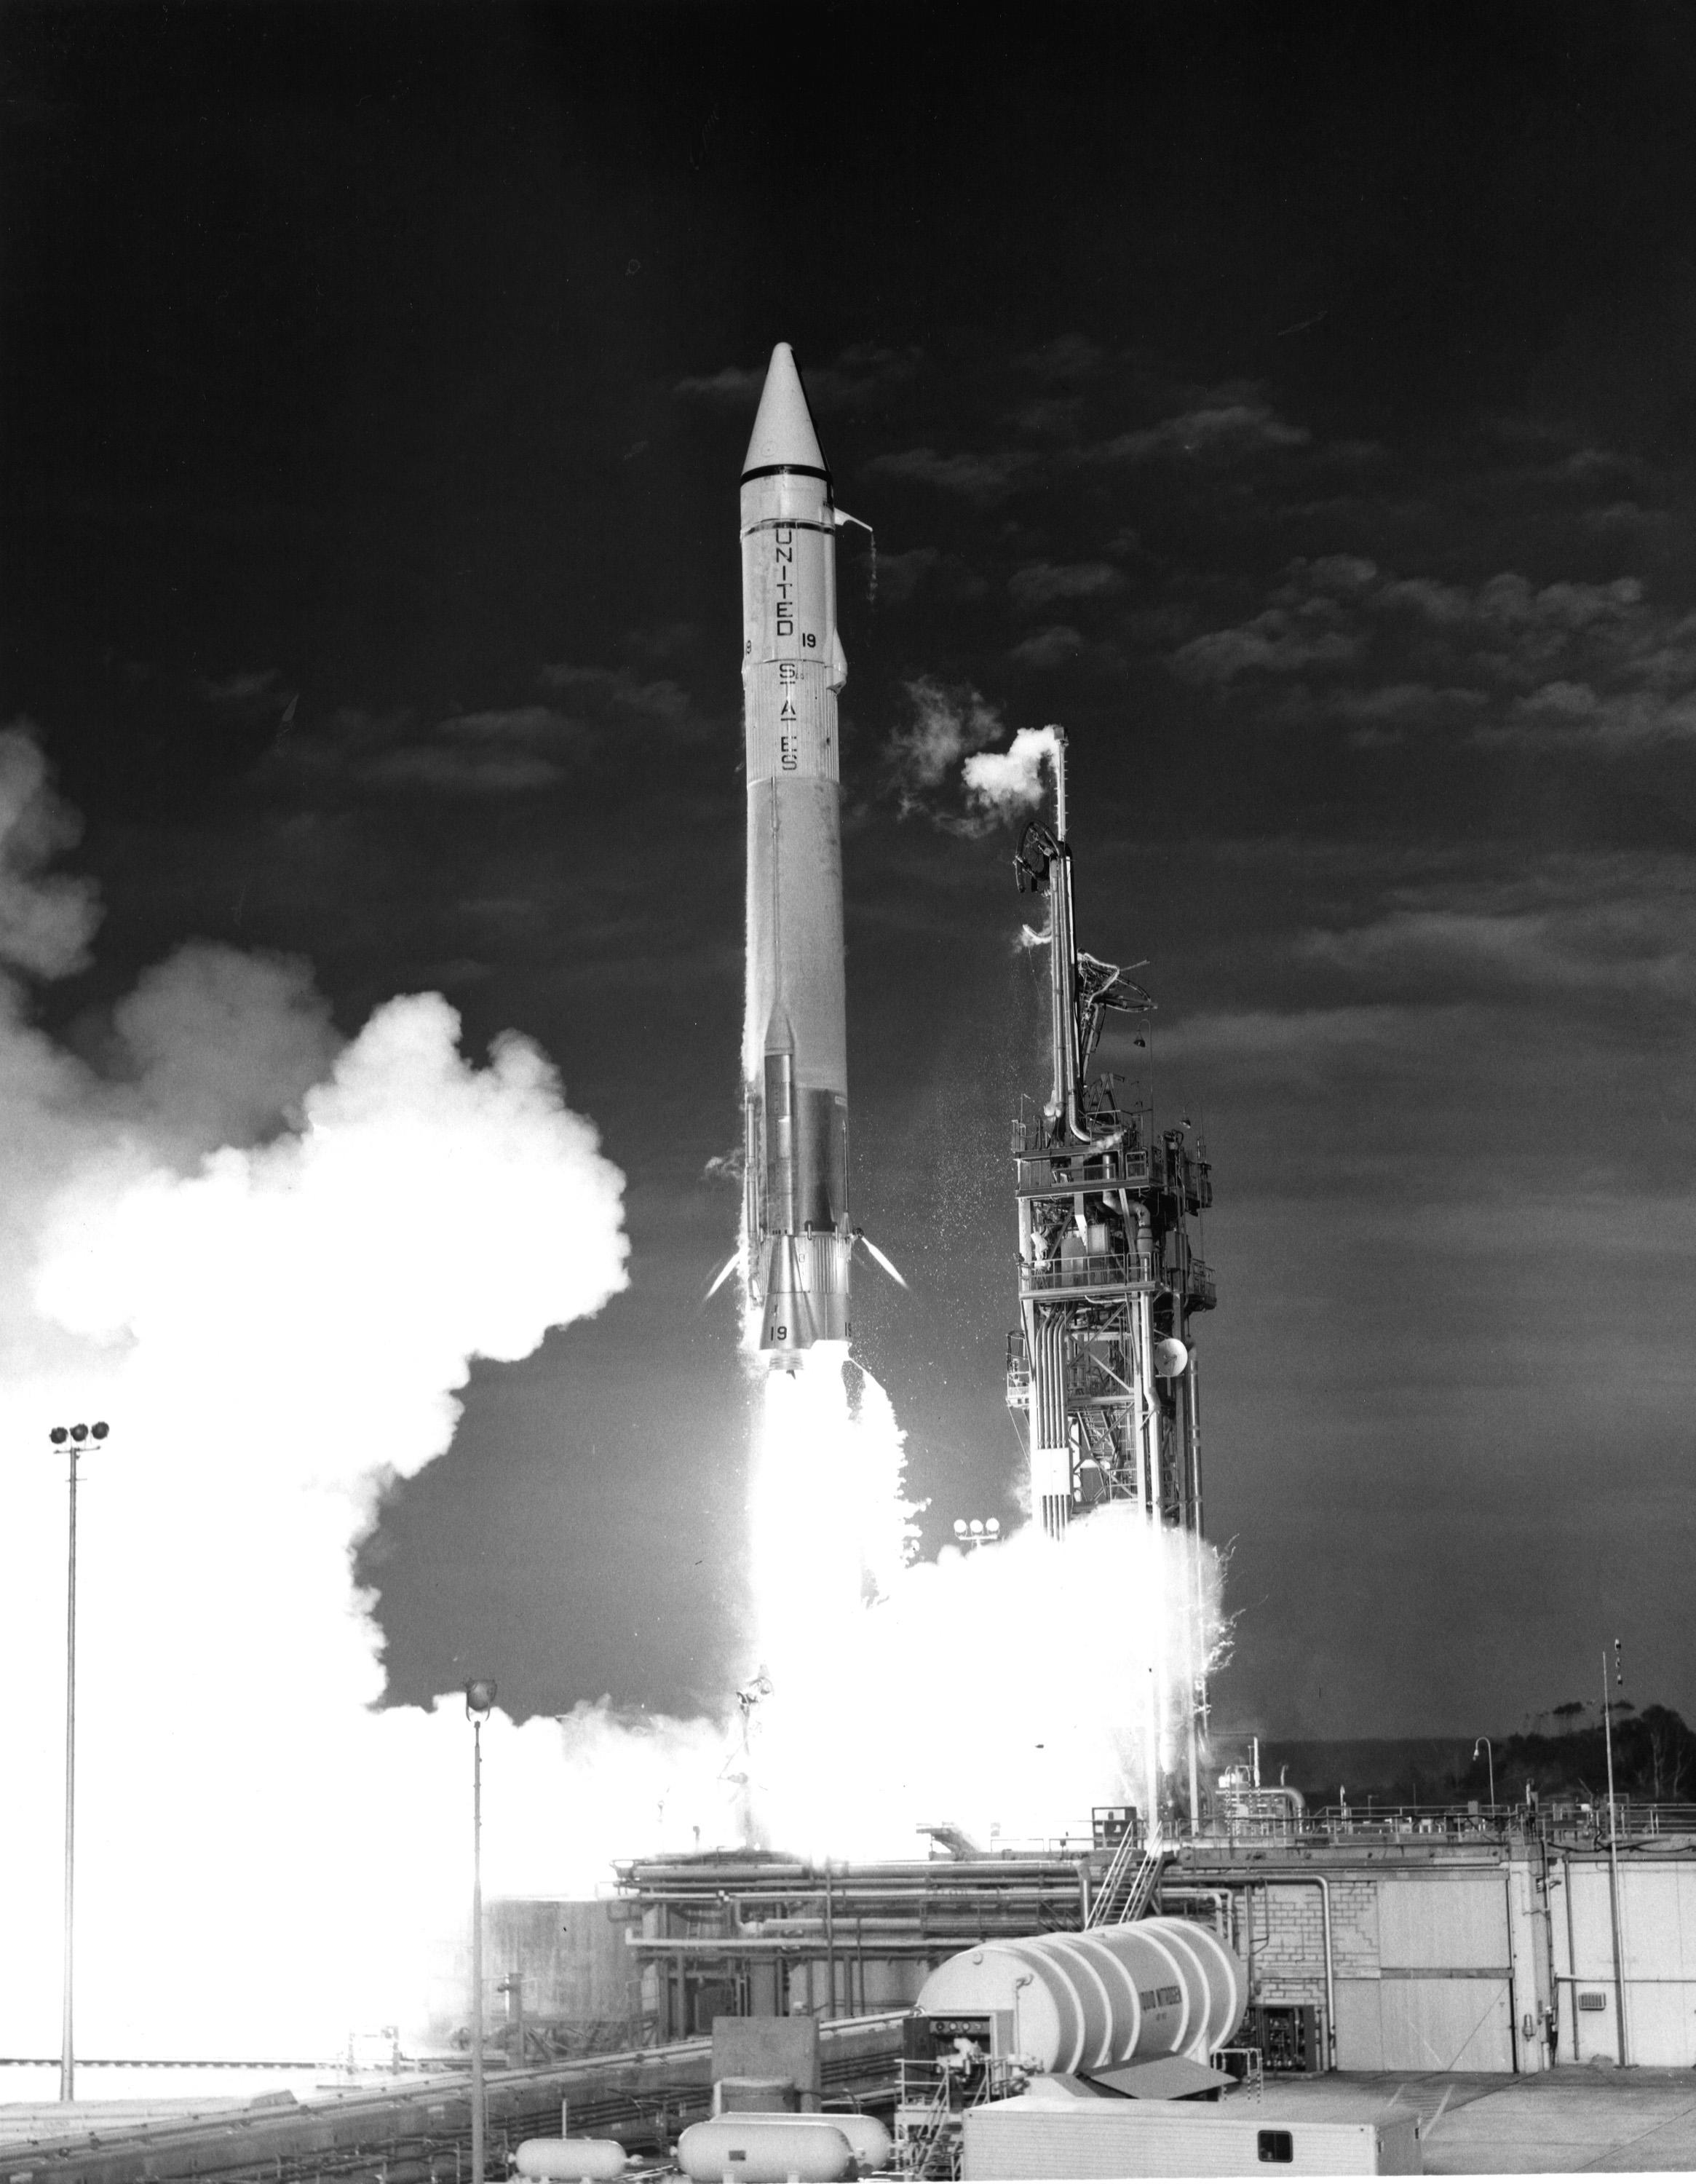 A black-and-white photo of the Mariner 7 launch. An Atlas-Centaur rocket takes off, flames pouring out underneath it and smoke billowing off to the left. The words "United States" are written on the rocket. A few wispy clouds are visible in the sky.